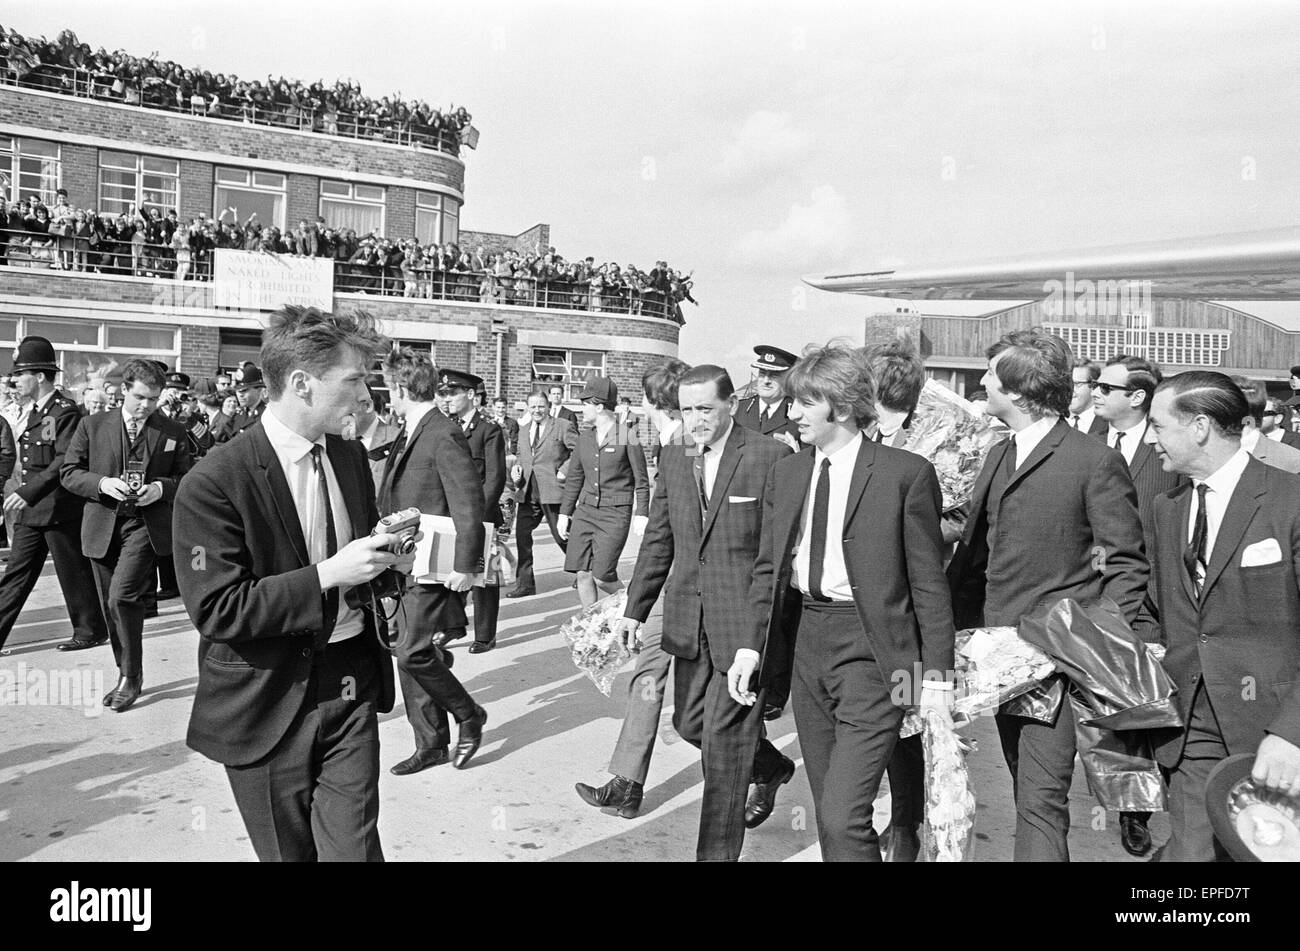 The Beatles in Liverpool for the Premier of a Hard Day's Night. John Lennon, Ringo Starr and George Harrison pictured here leaving the airport after their flight into Liverpool. Fans and Photographers greet them. 10th July 1964. Stock Photo